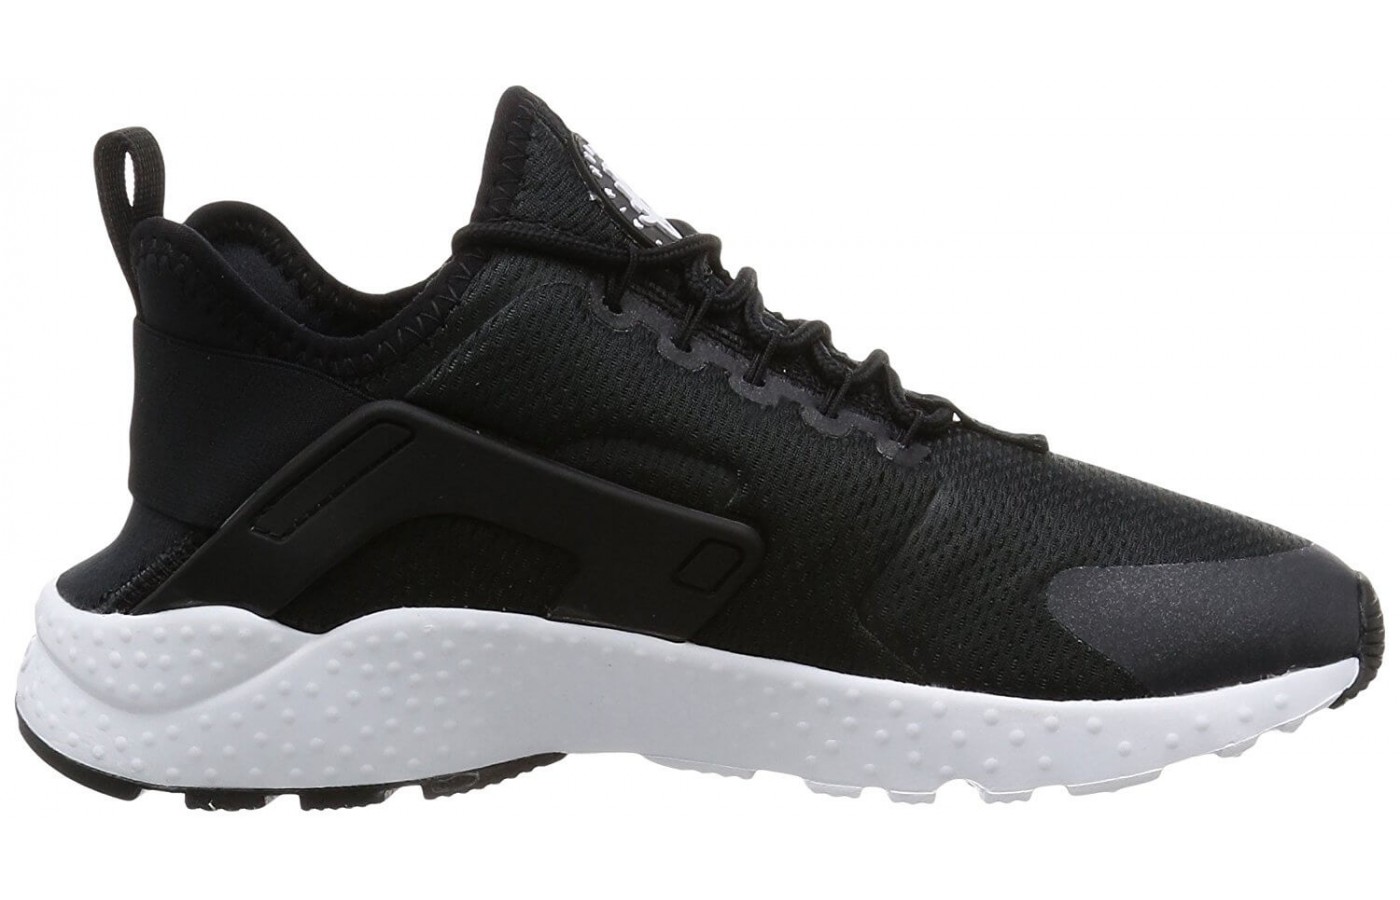 EVA cushioning in the midsole of the Nike Air Huarache Ultra provides excellent support.